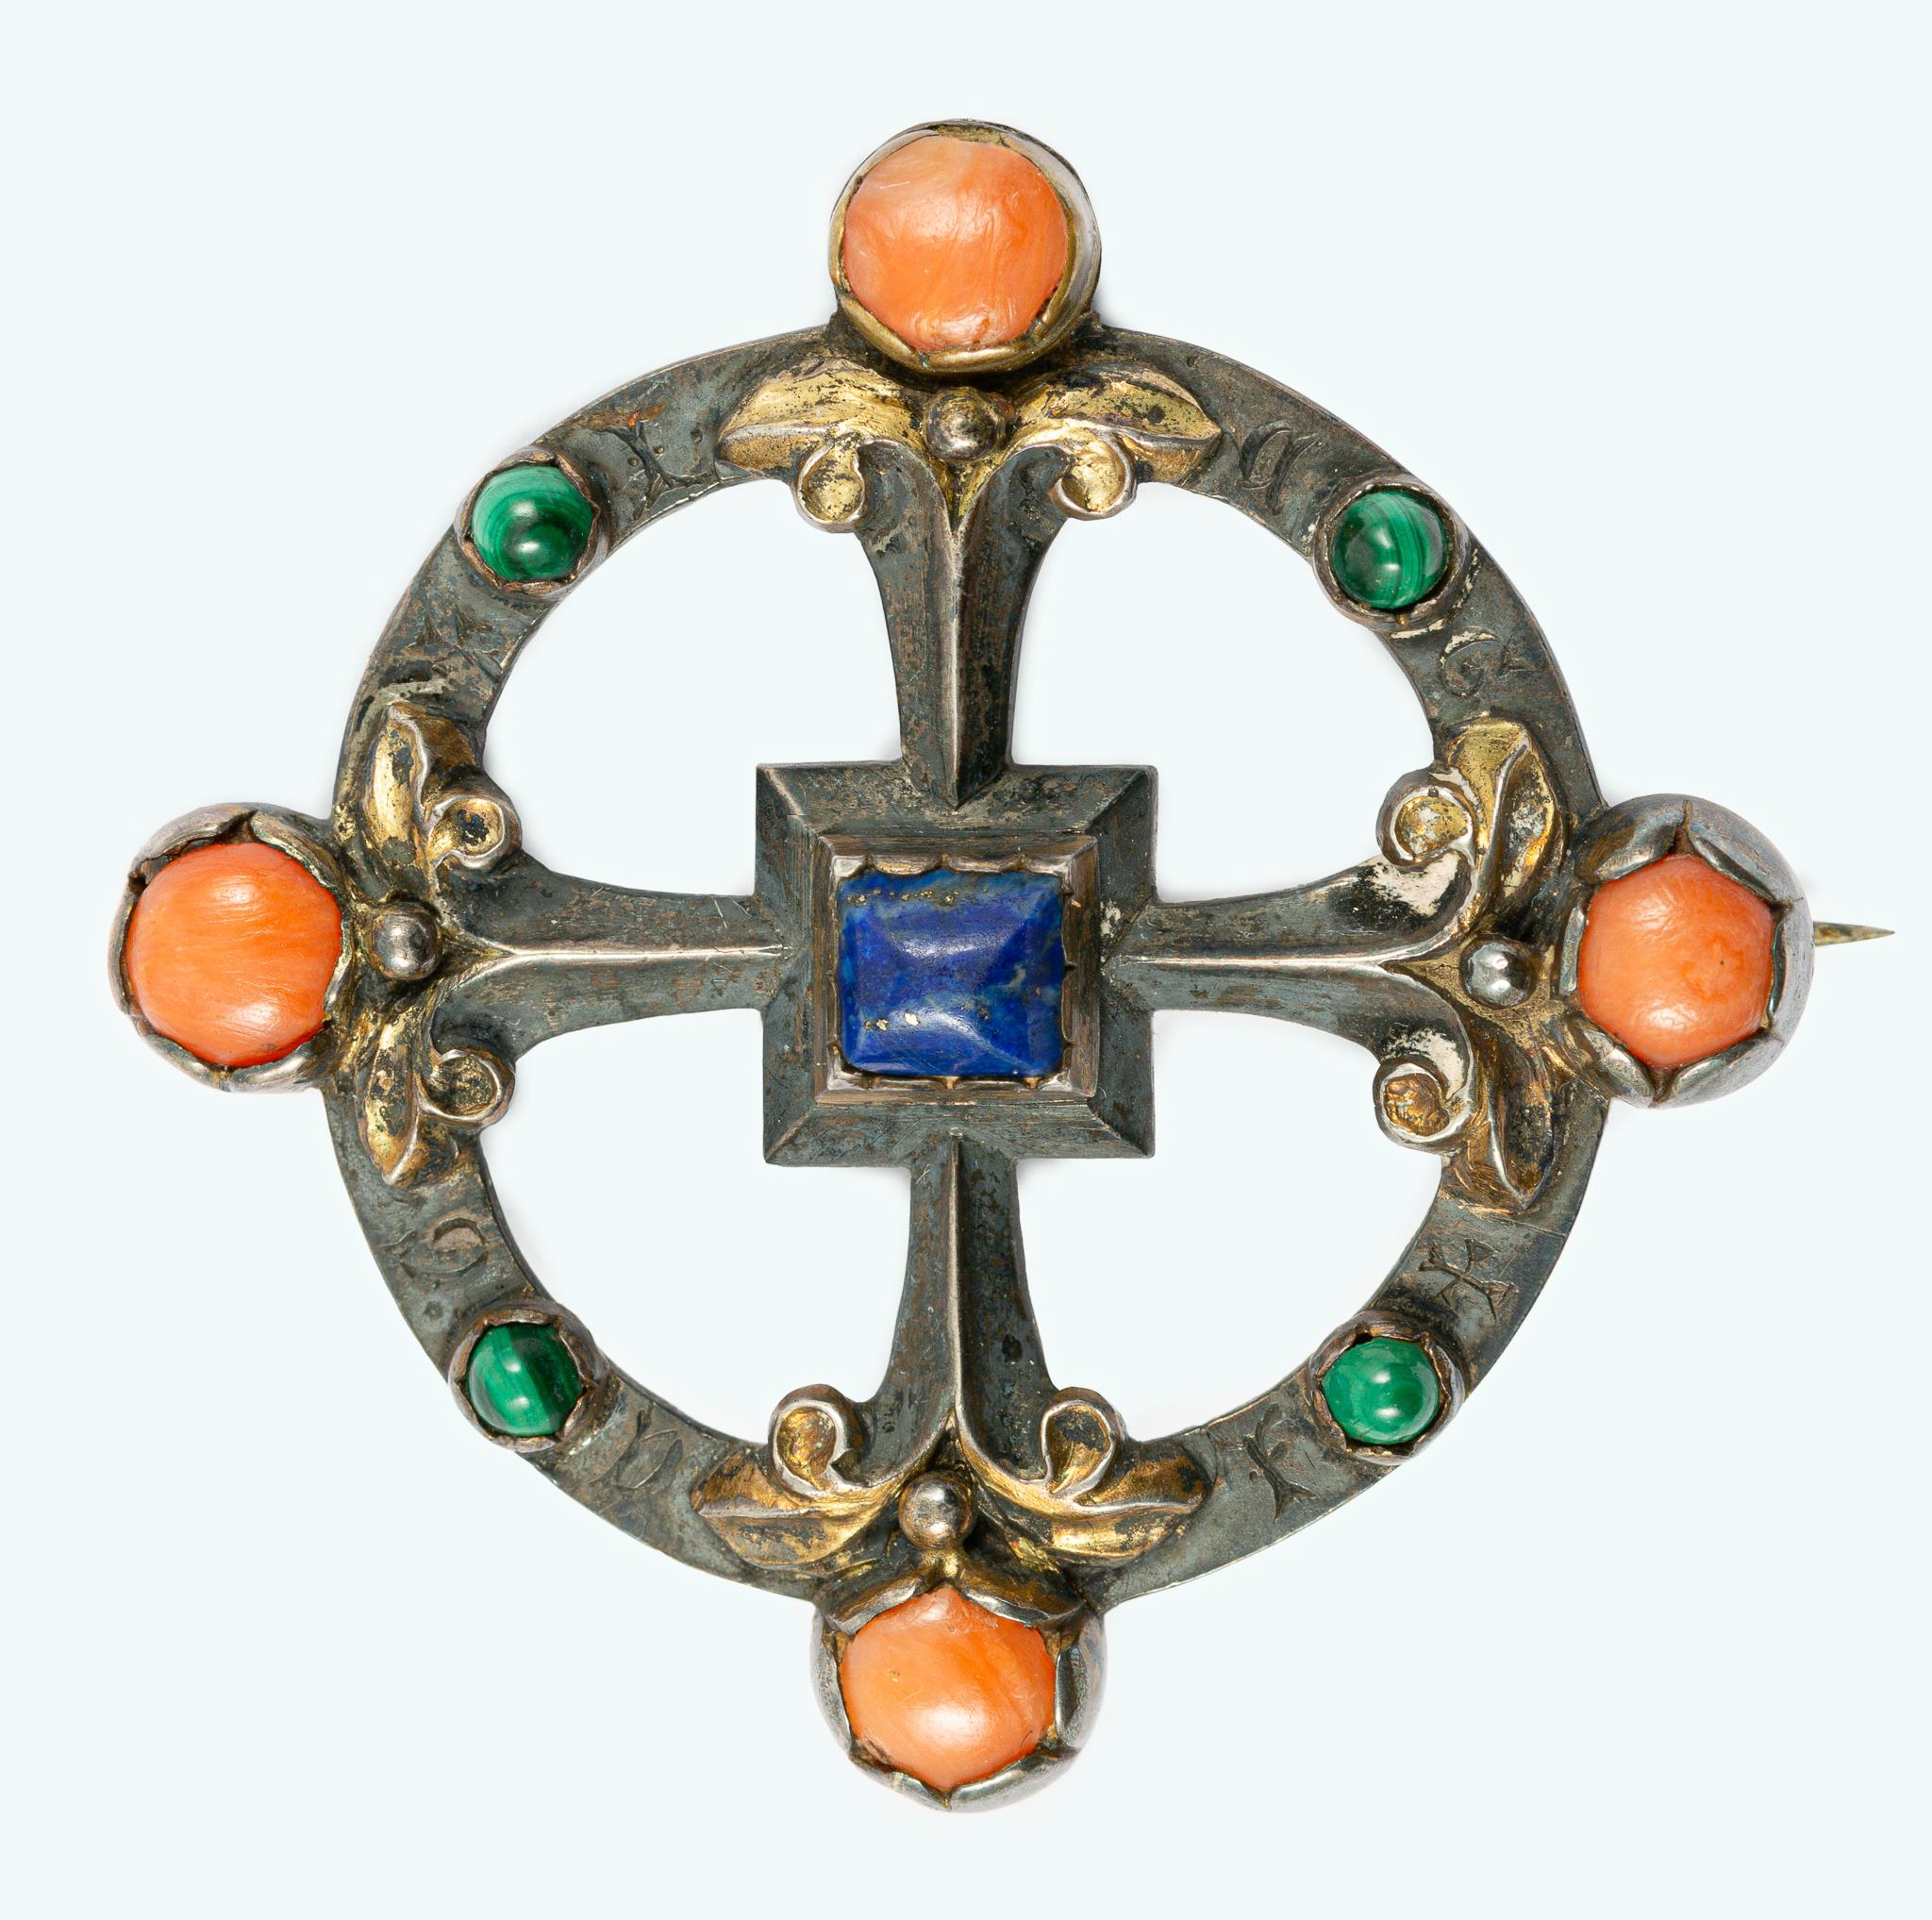 Our Remarkable Story with Burges Brooches Continues... 